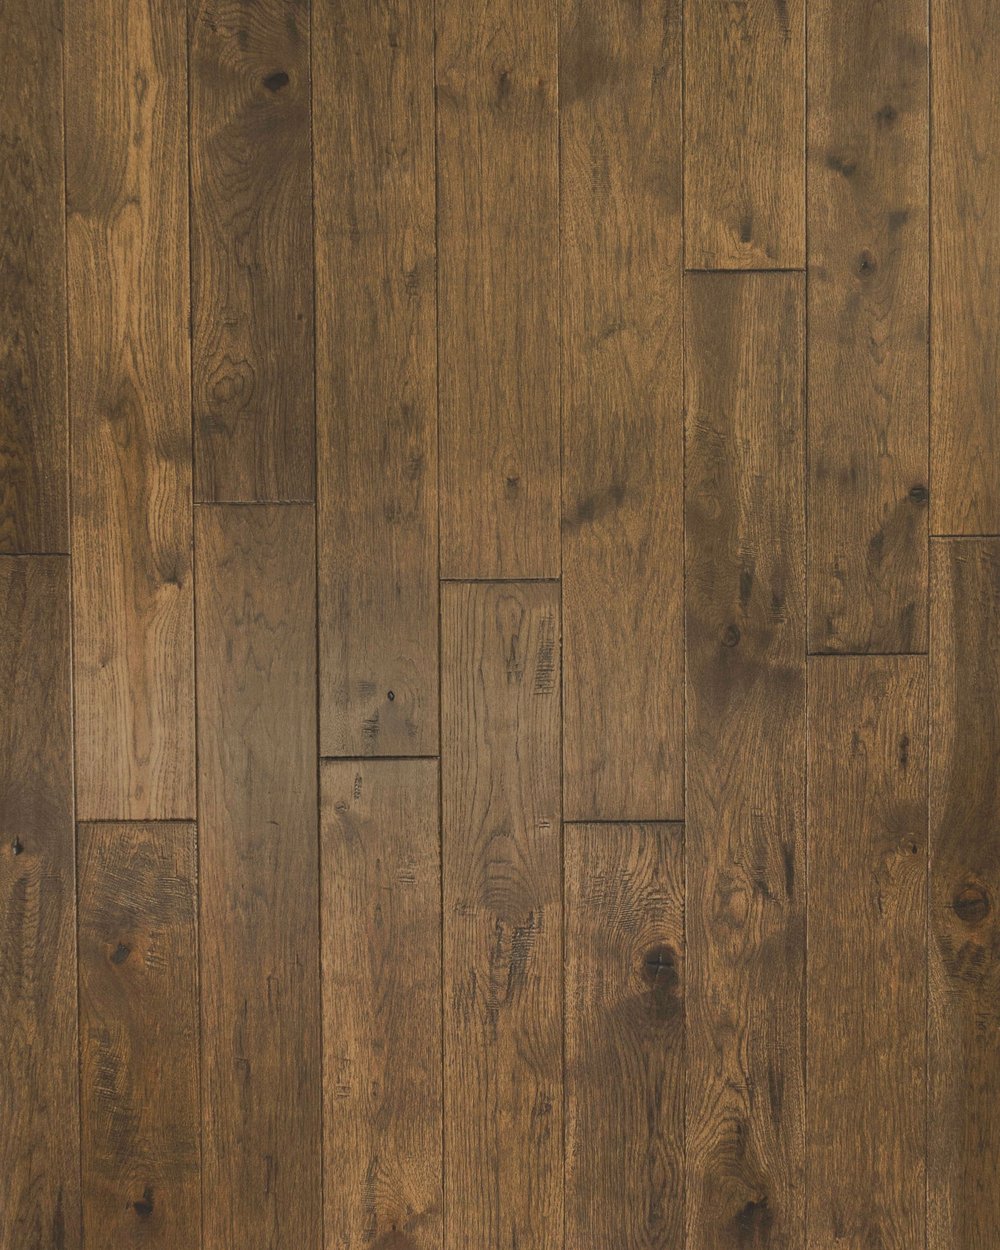 Best Engineered Wood Flooring For High, What Is The Best Type Of Flooring For High Traffic Areas